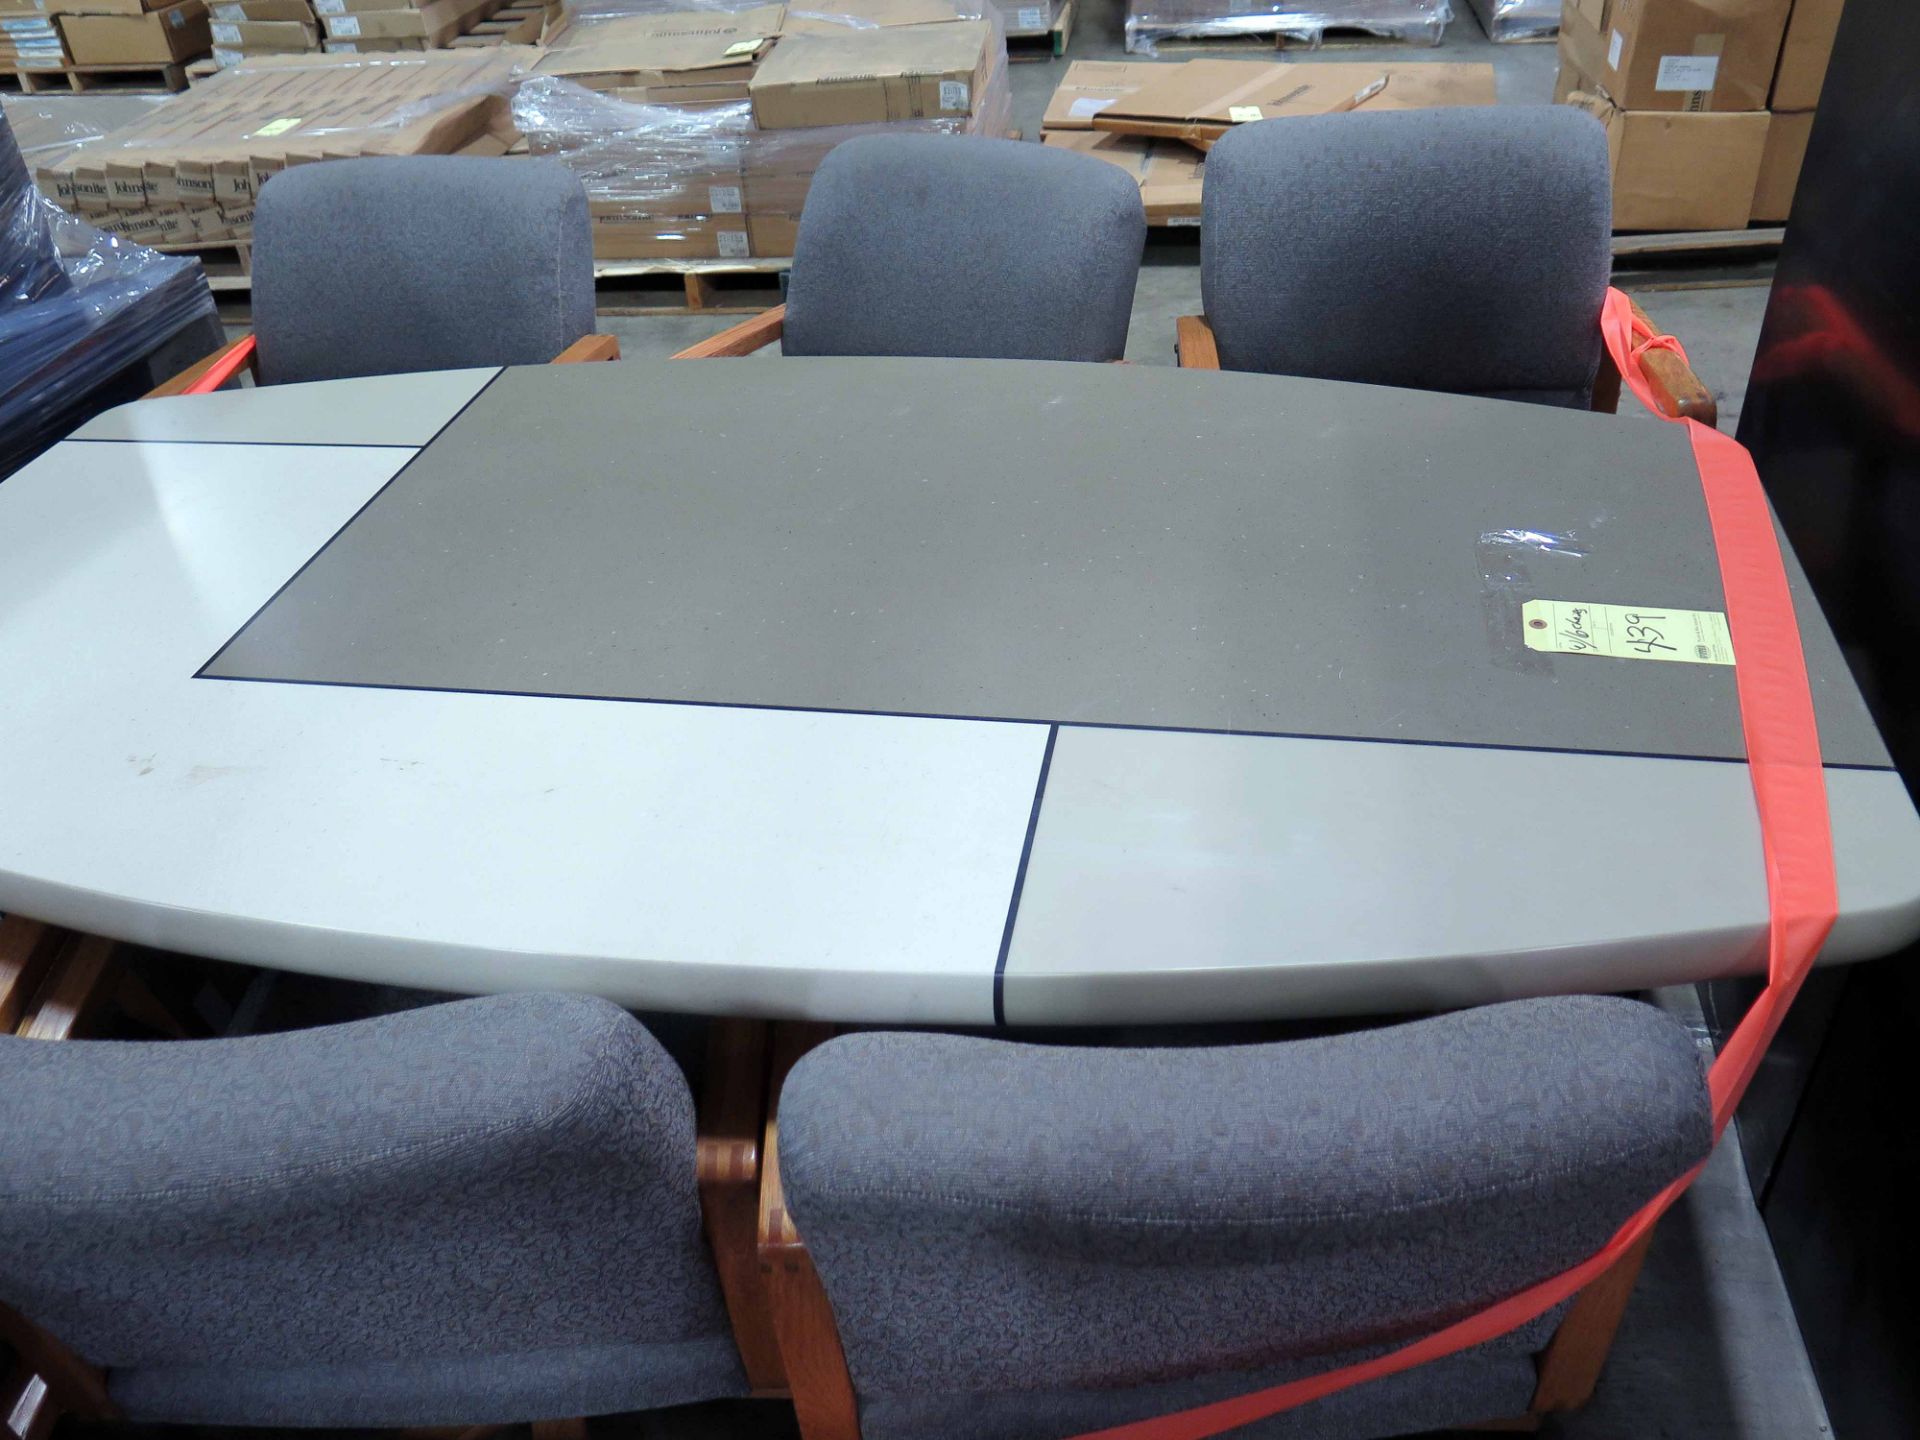 LOT CONSISTING OF CONFERENCE TABLE & (6) CHAIRS - Image 2 of 2